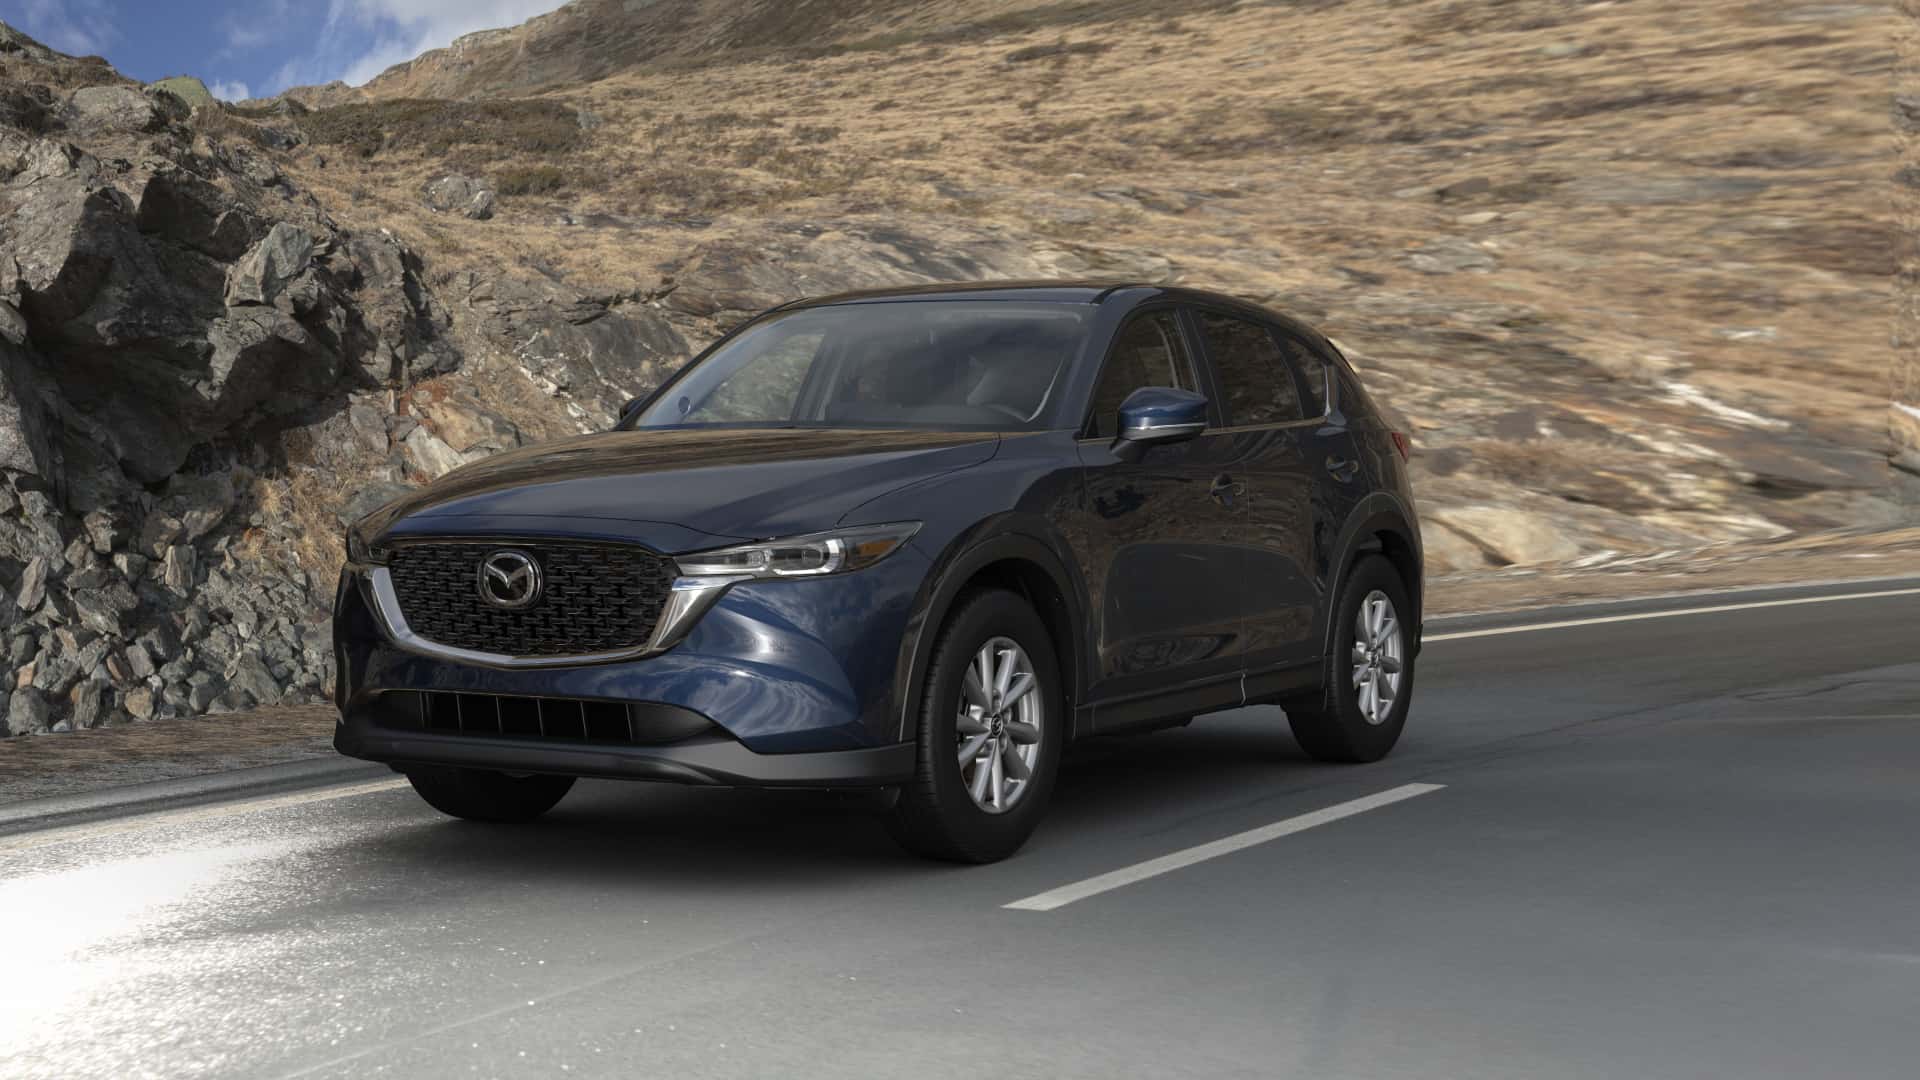 2023 Mazda CX-5 2.5 S Preferred Deep Crystal Blue Mica | Mazda of South Charlotte in Pineville NC